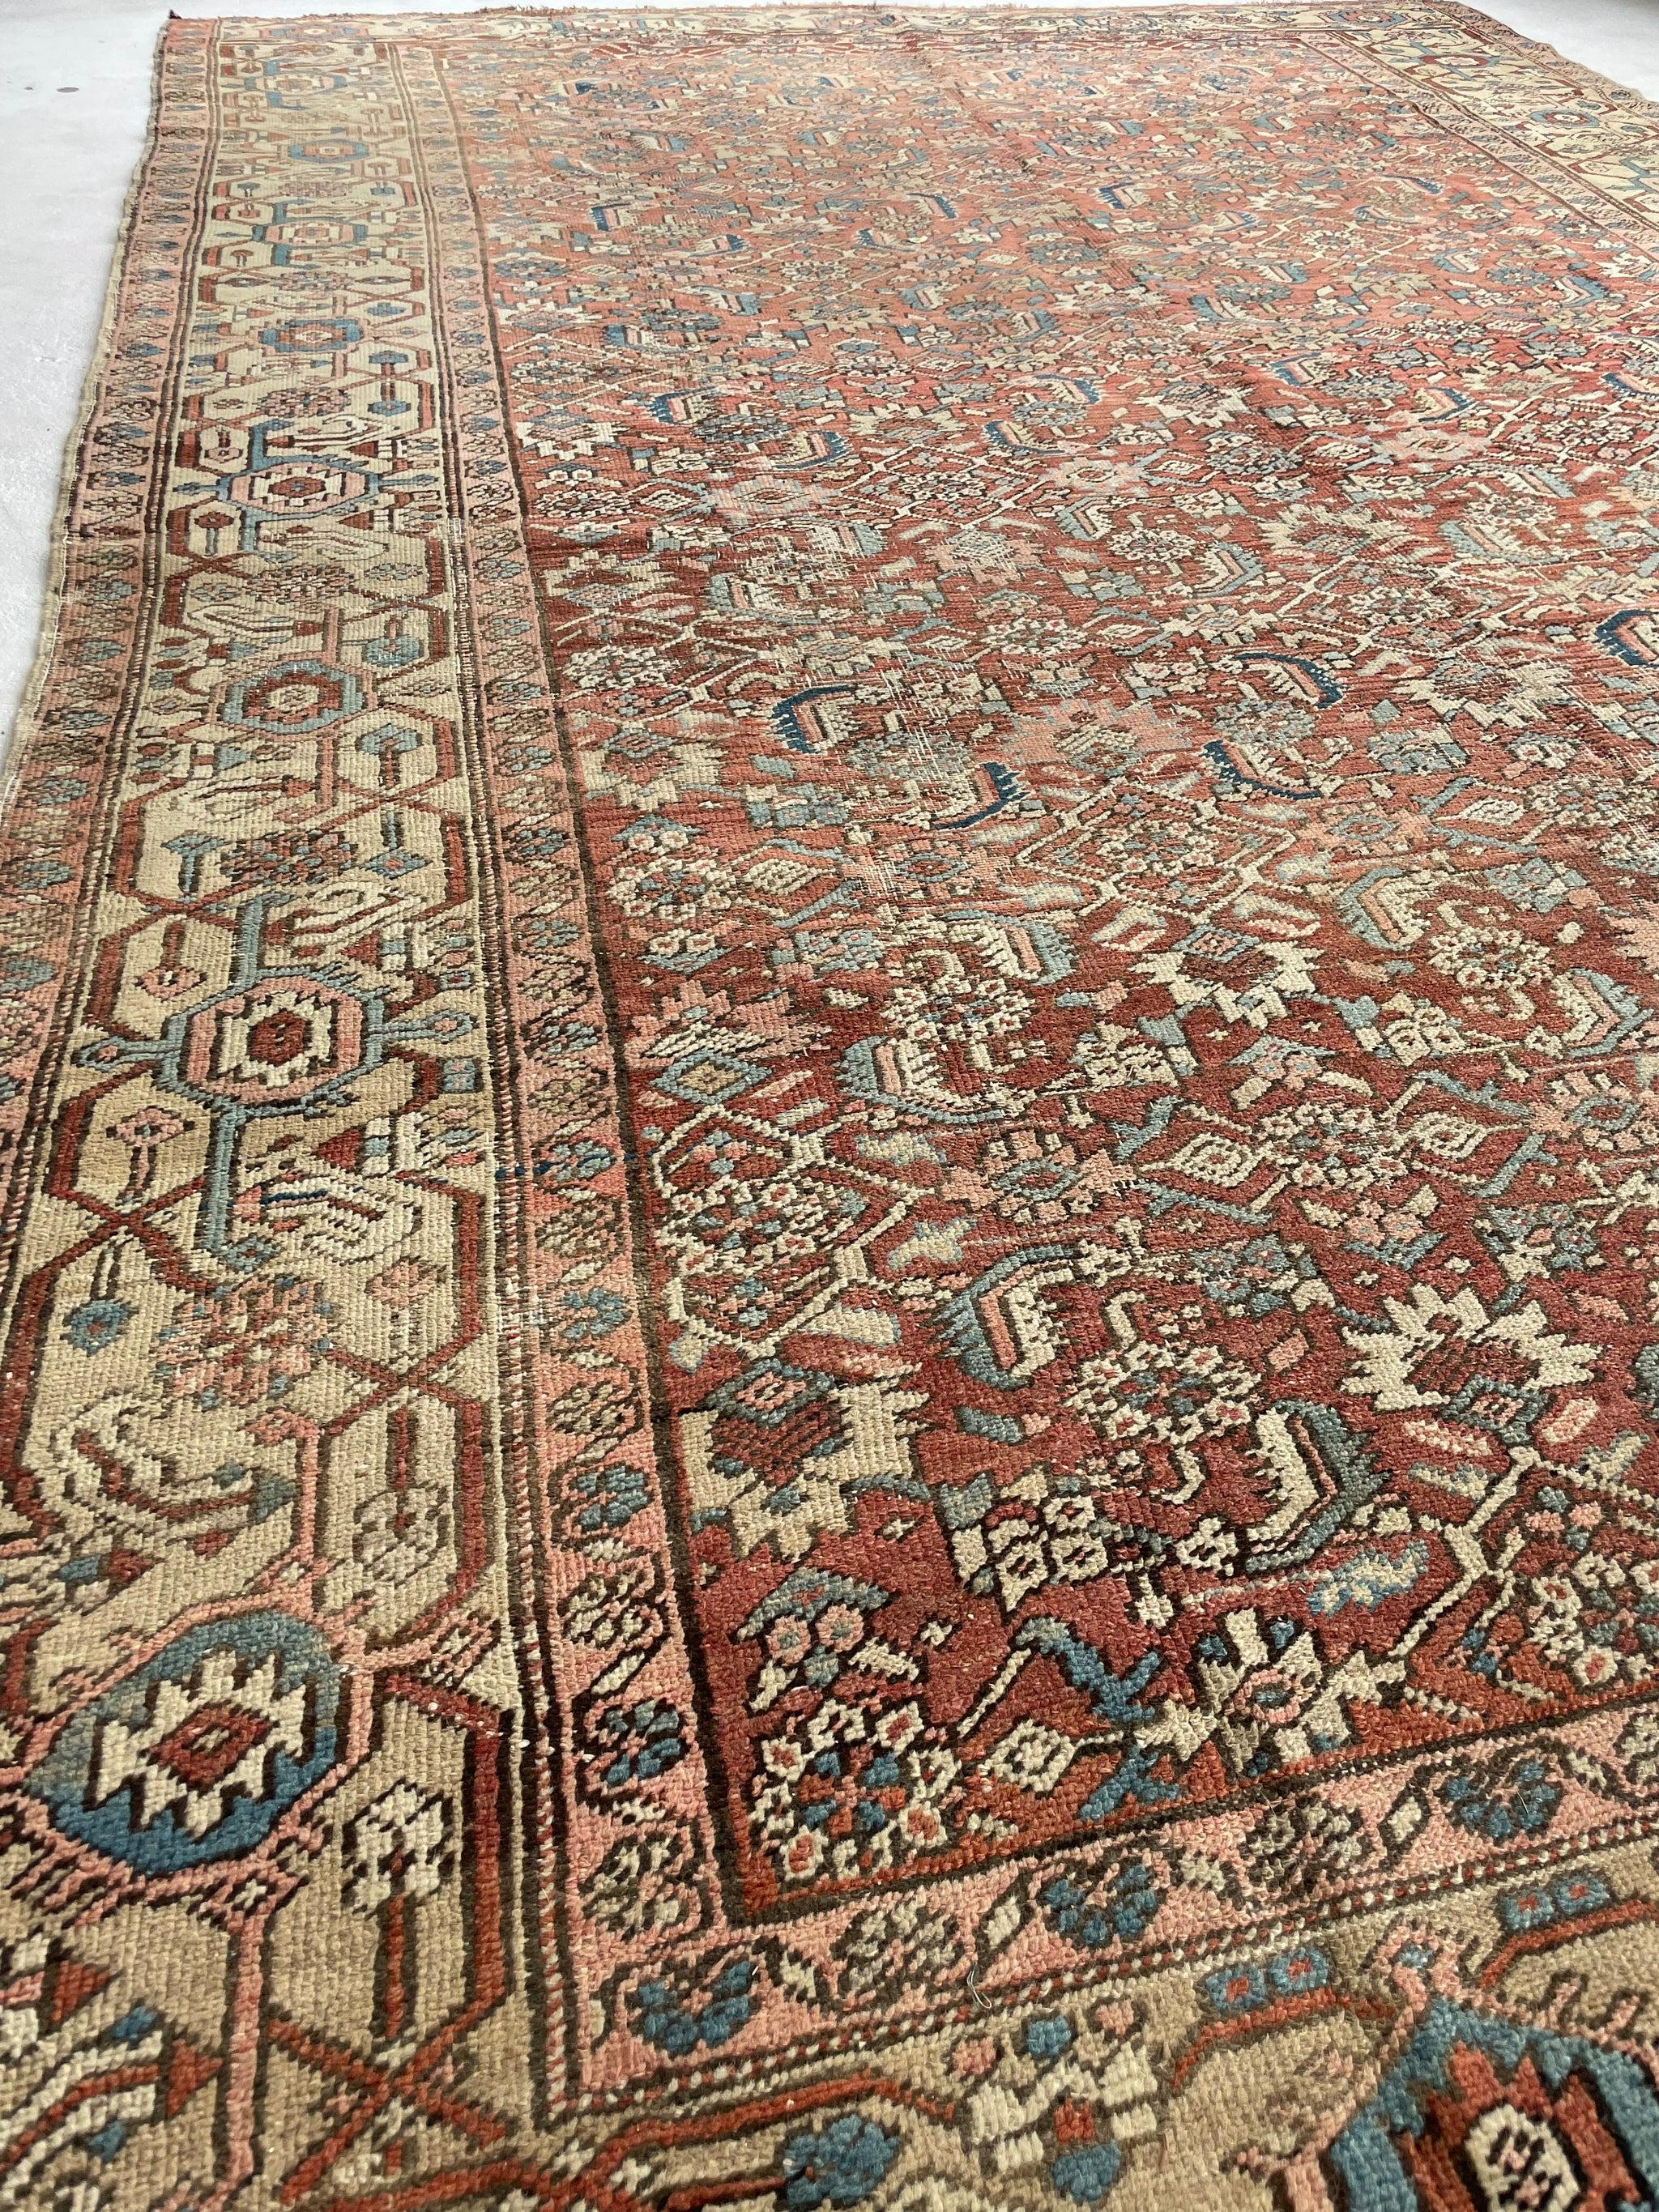 Truly amazing antique rug with iconic design but fascinating Abrash throughout

Size: 7.11 x 12.6
Age: Antique; C. 1920's
Pile: Low/Medium with nice age-related wear and patina throughout. In amazing condition 

This rug is one-of-a-kind, only